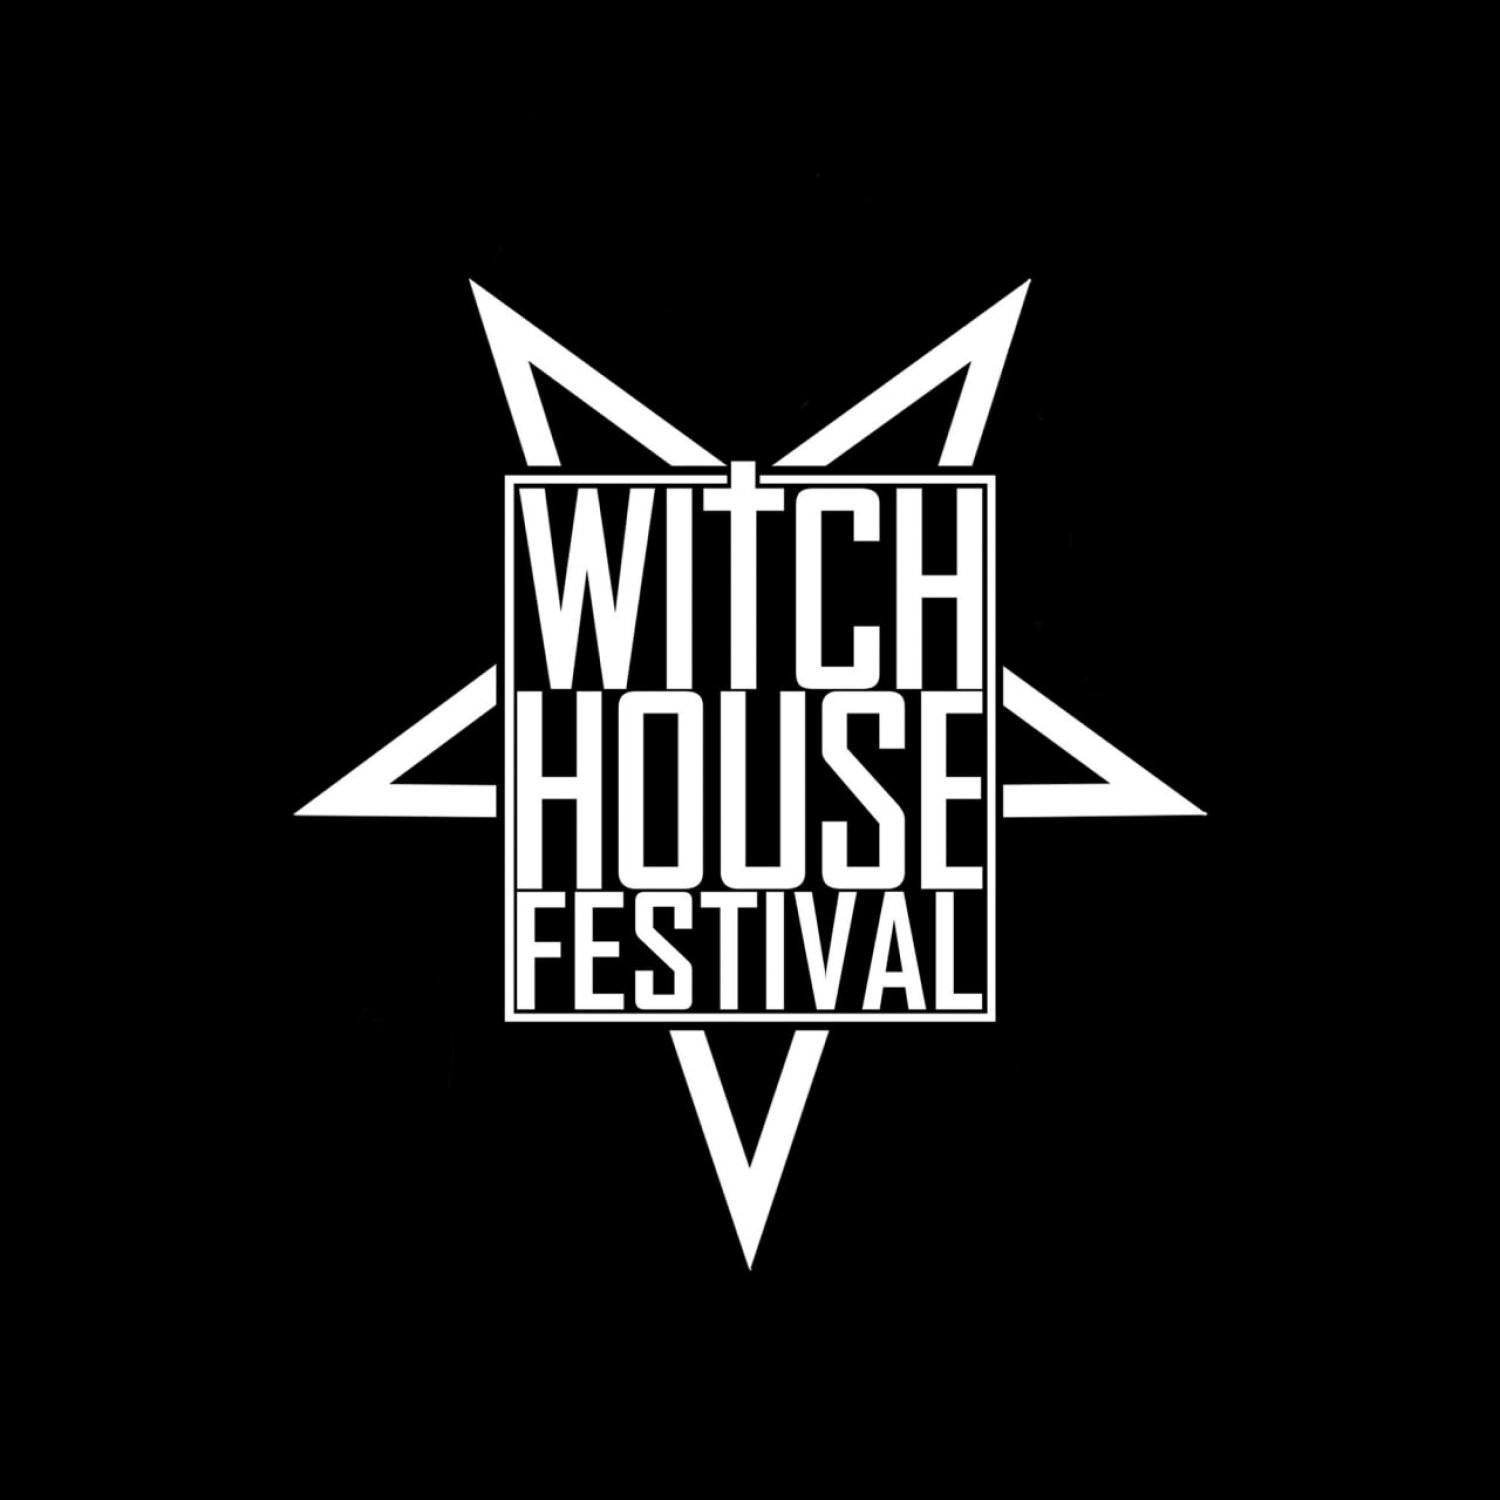 WITCH HOUSE FESTIVAL